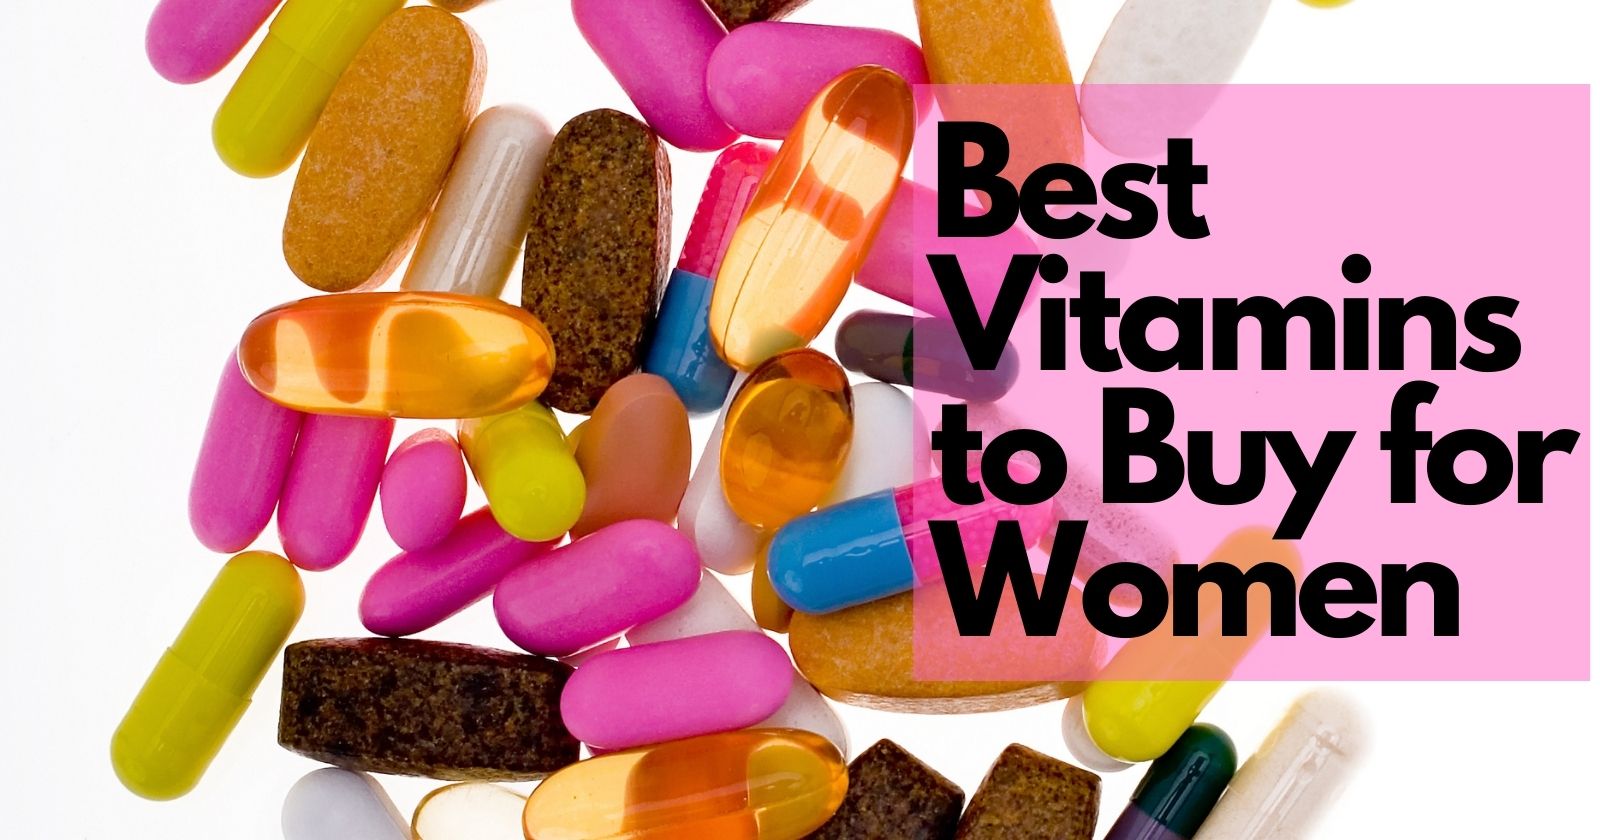 Best Vitamins to Buy for Women